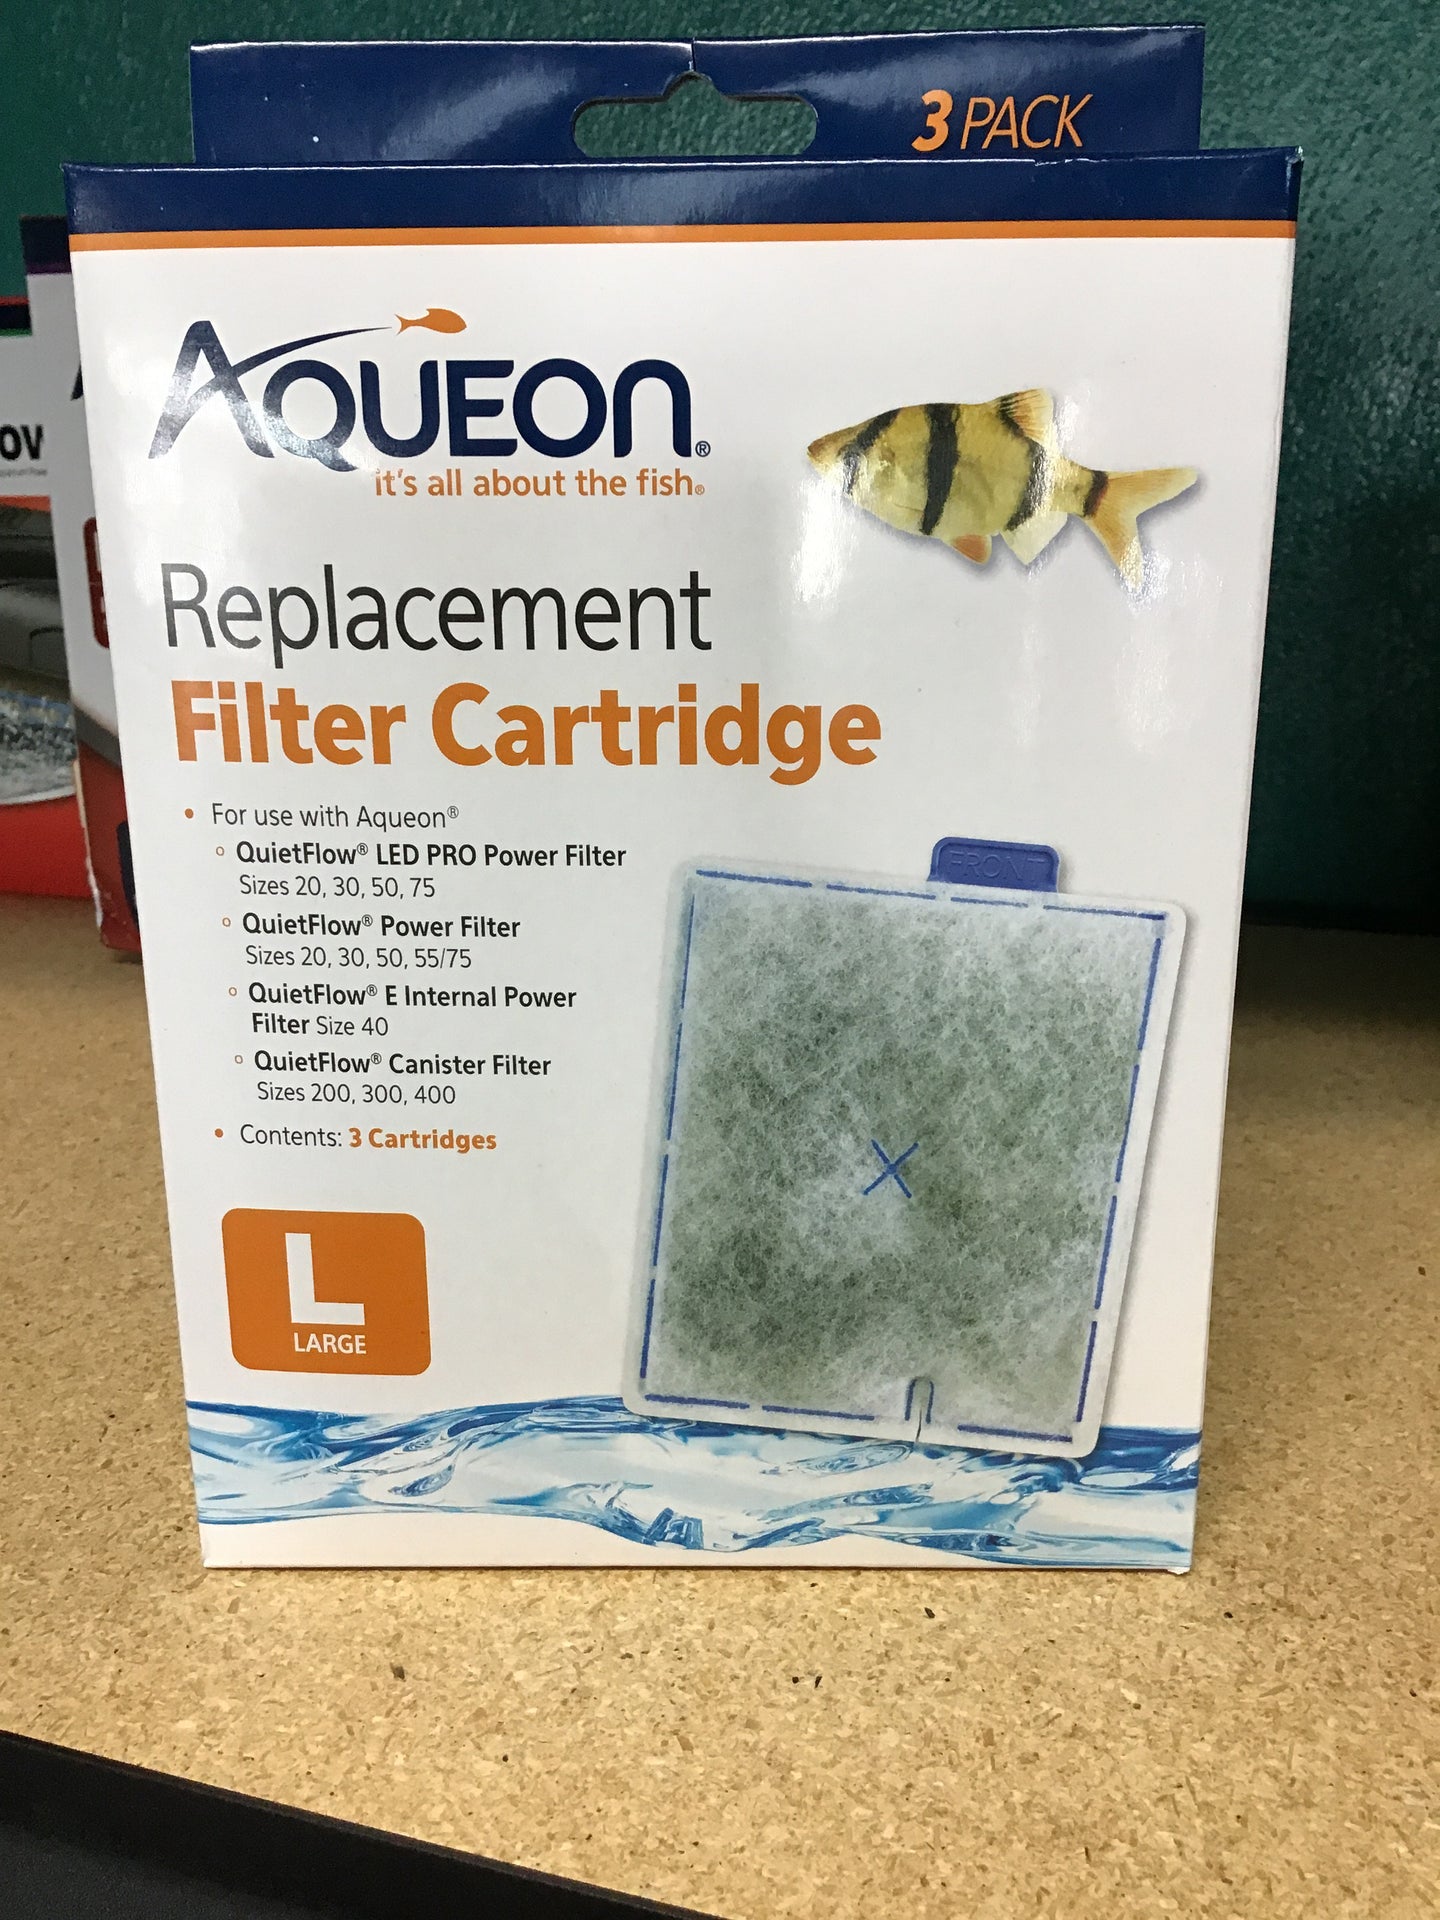 Aqueon Large replacement filters 3pack